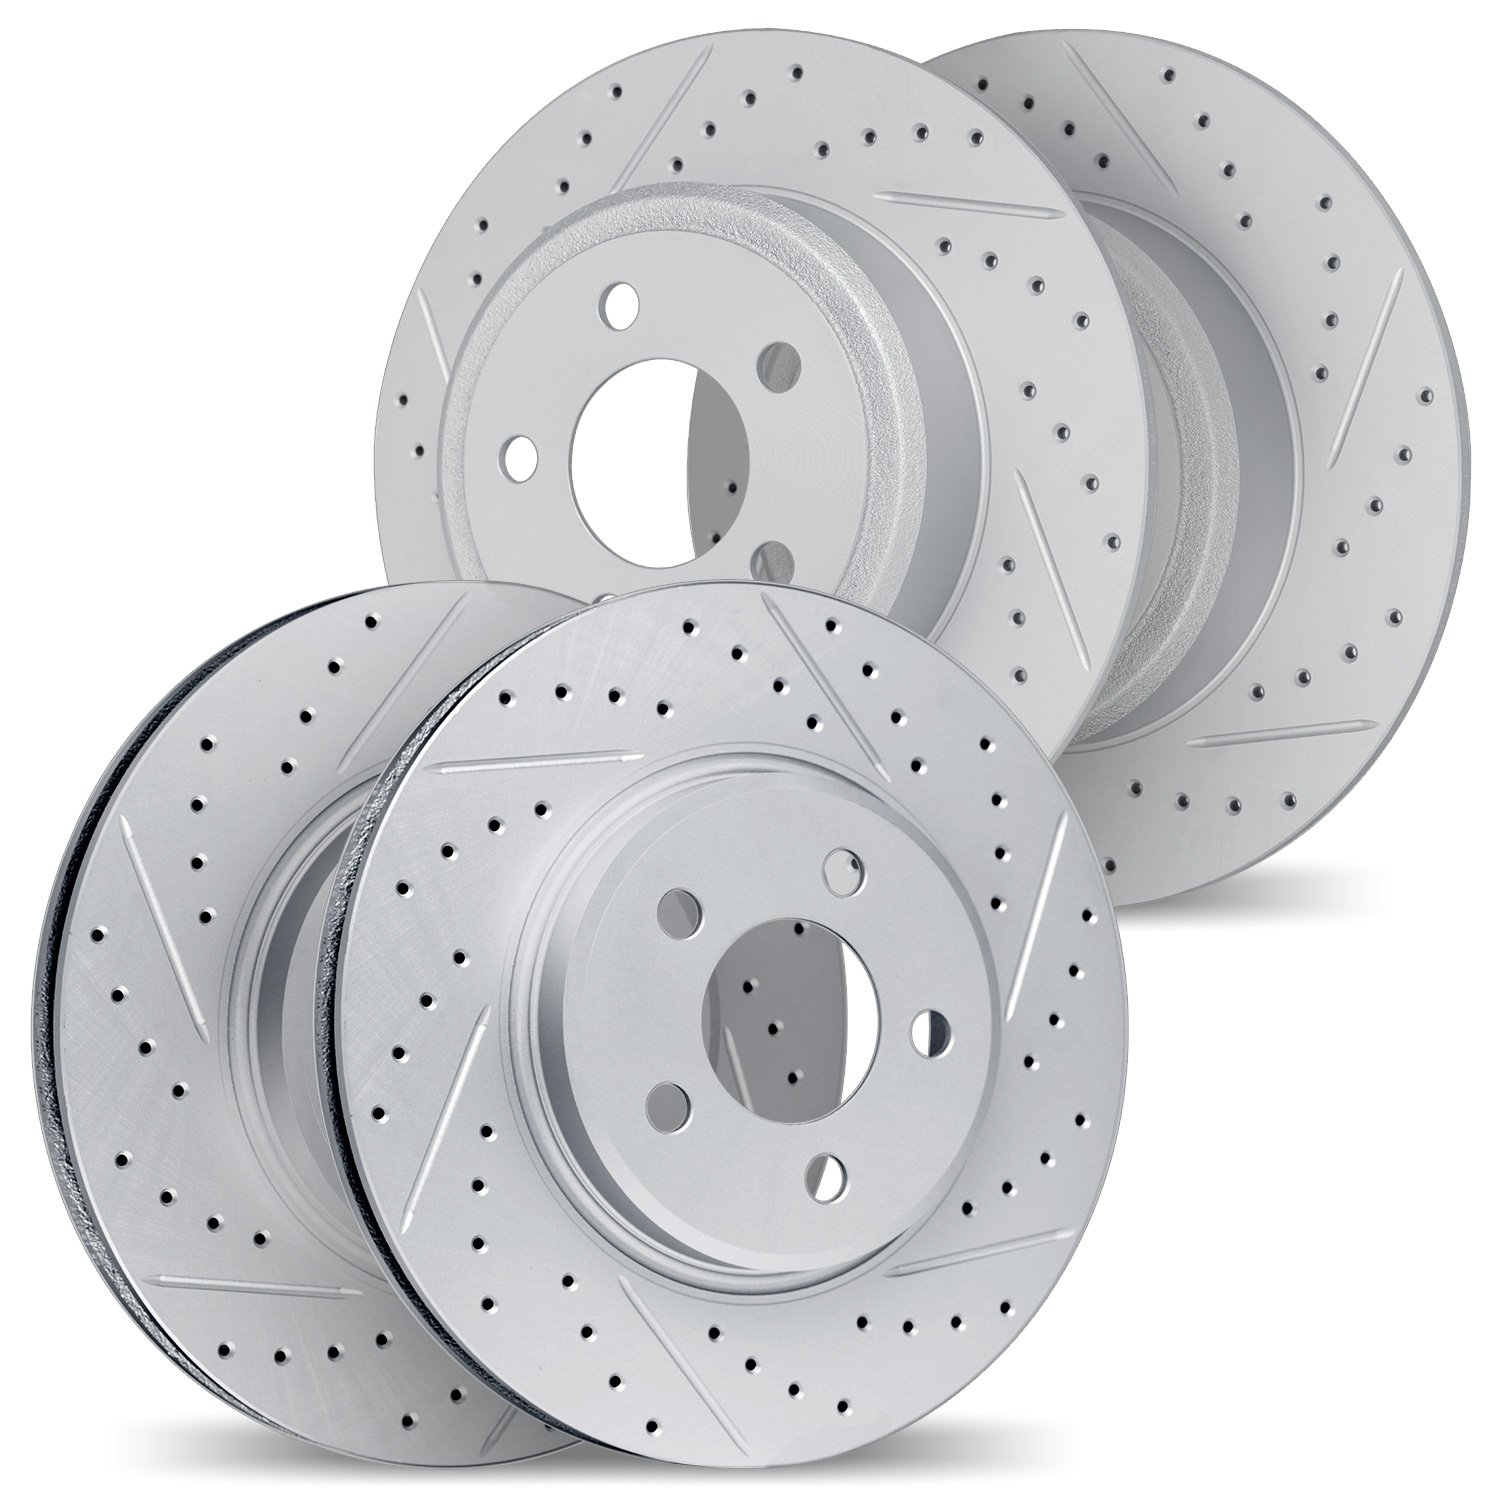 2004-03012 Geoperformance Drilled/Slotted Brake Rotors, 2011-2019 Kia/Hyundai/Genesis, Position: Front and Rear